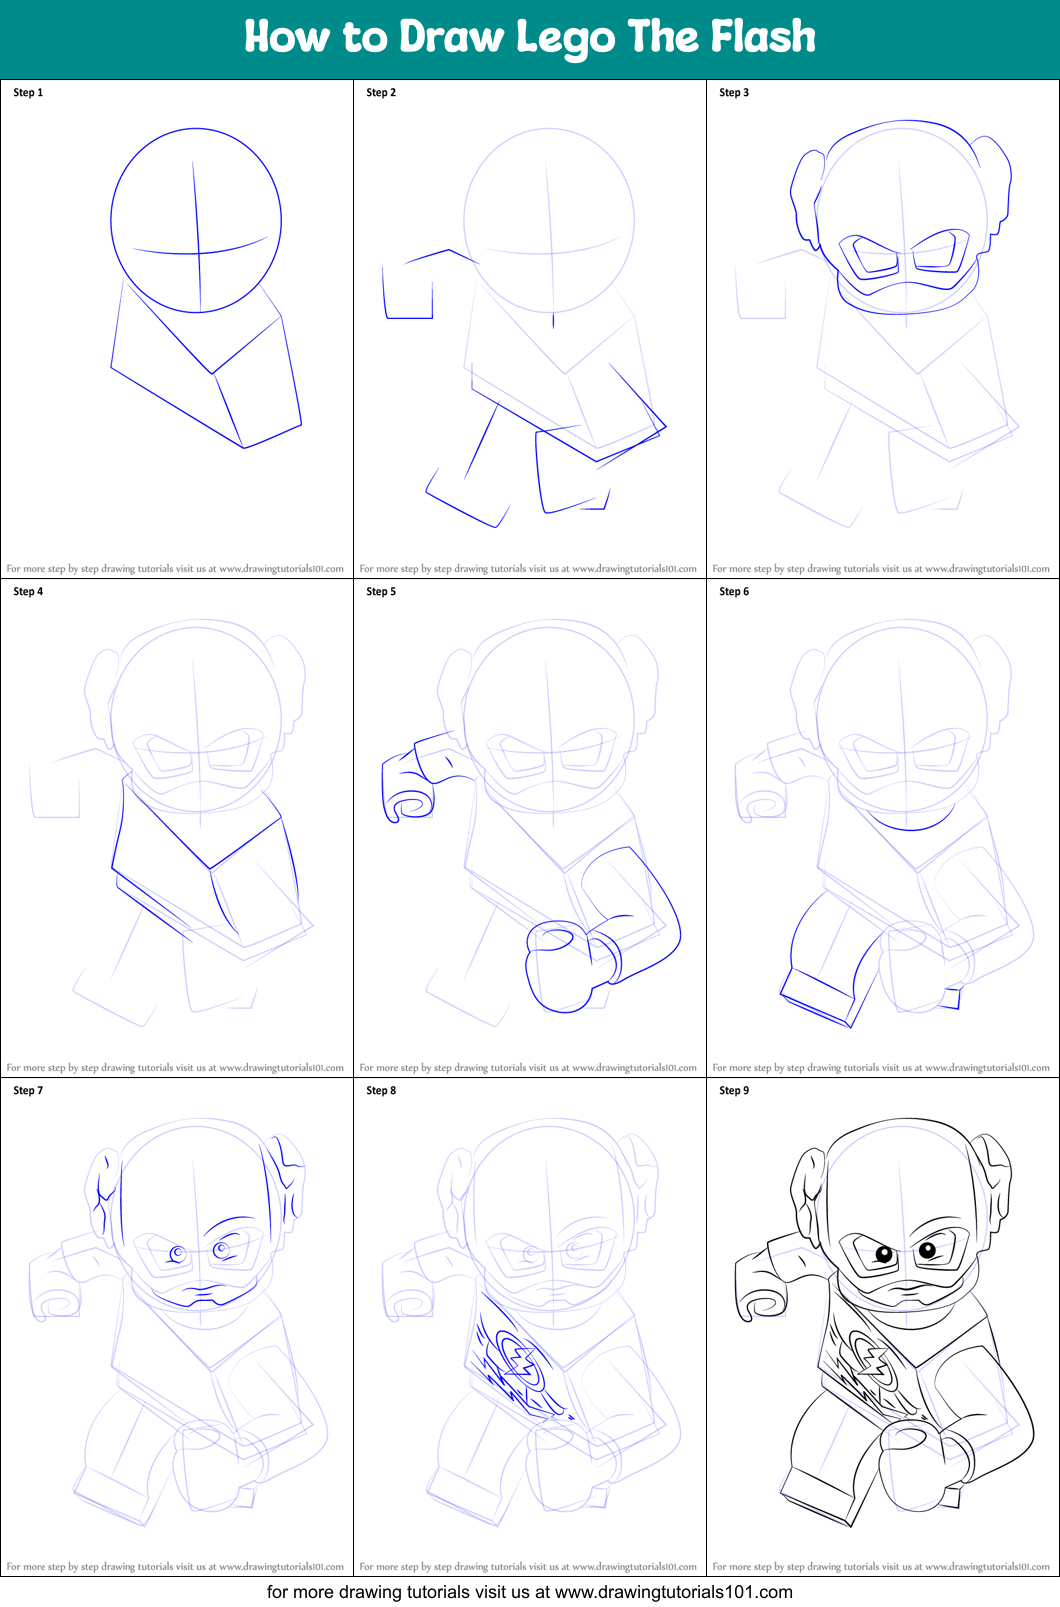 How to Draw Lego The Flash Step by Step